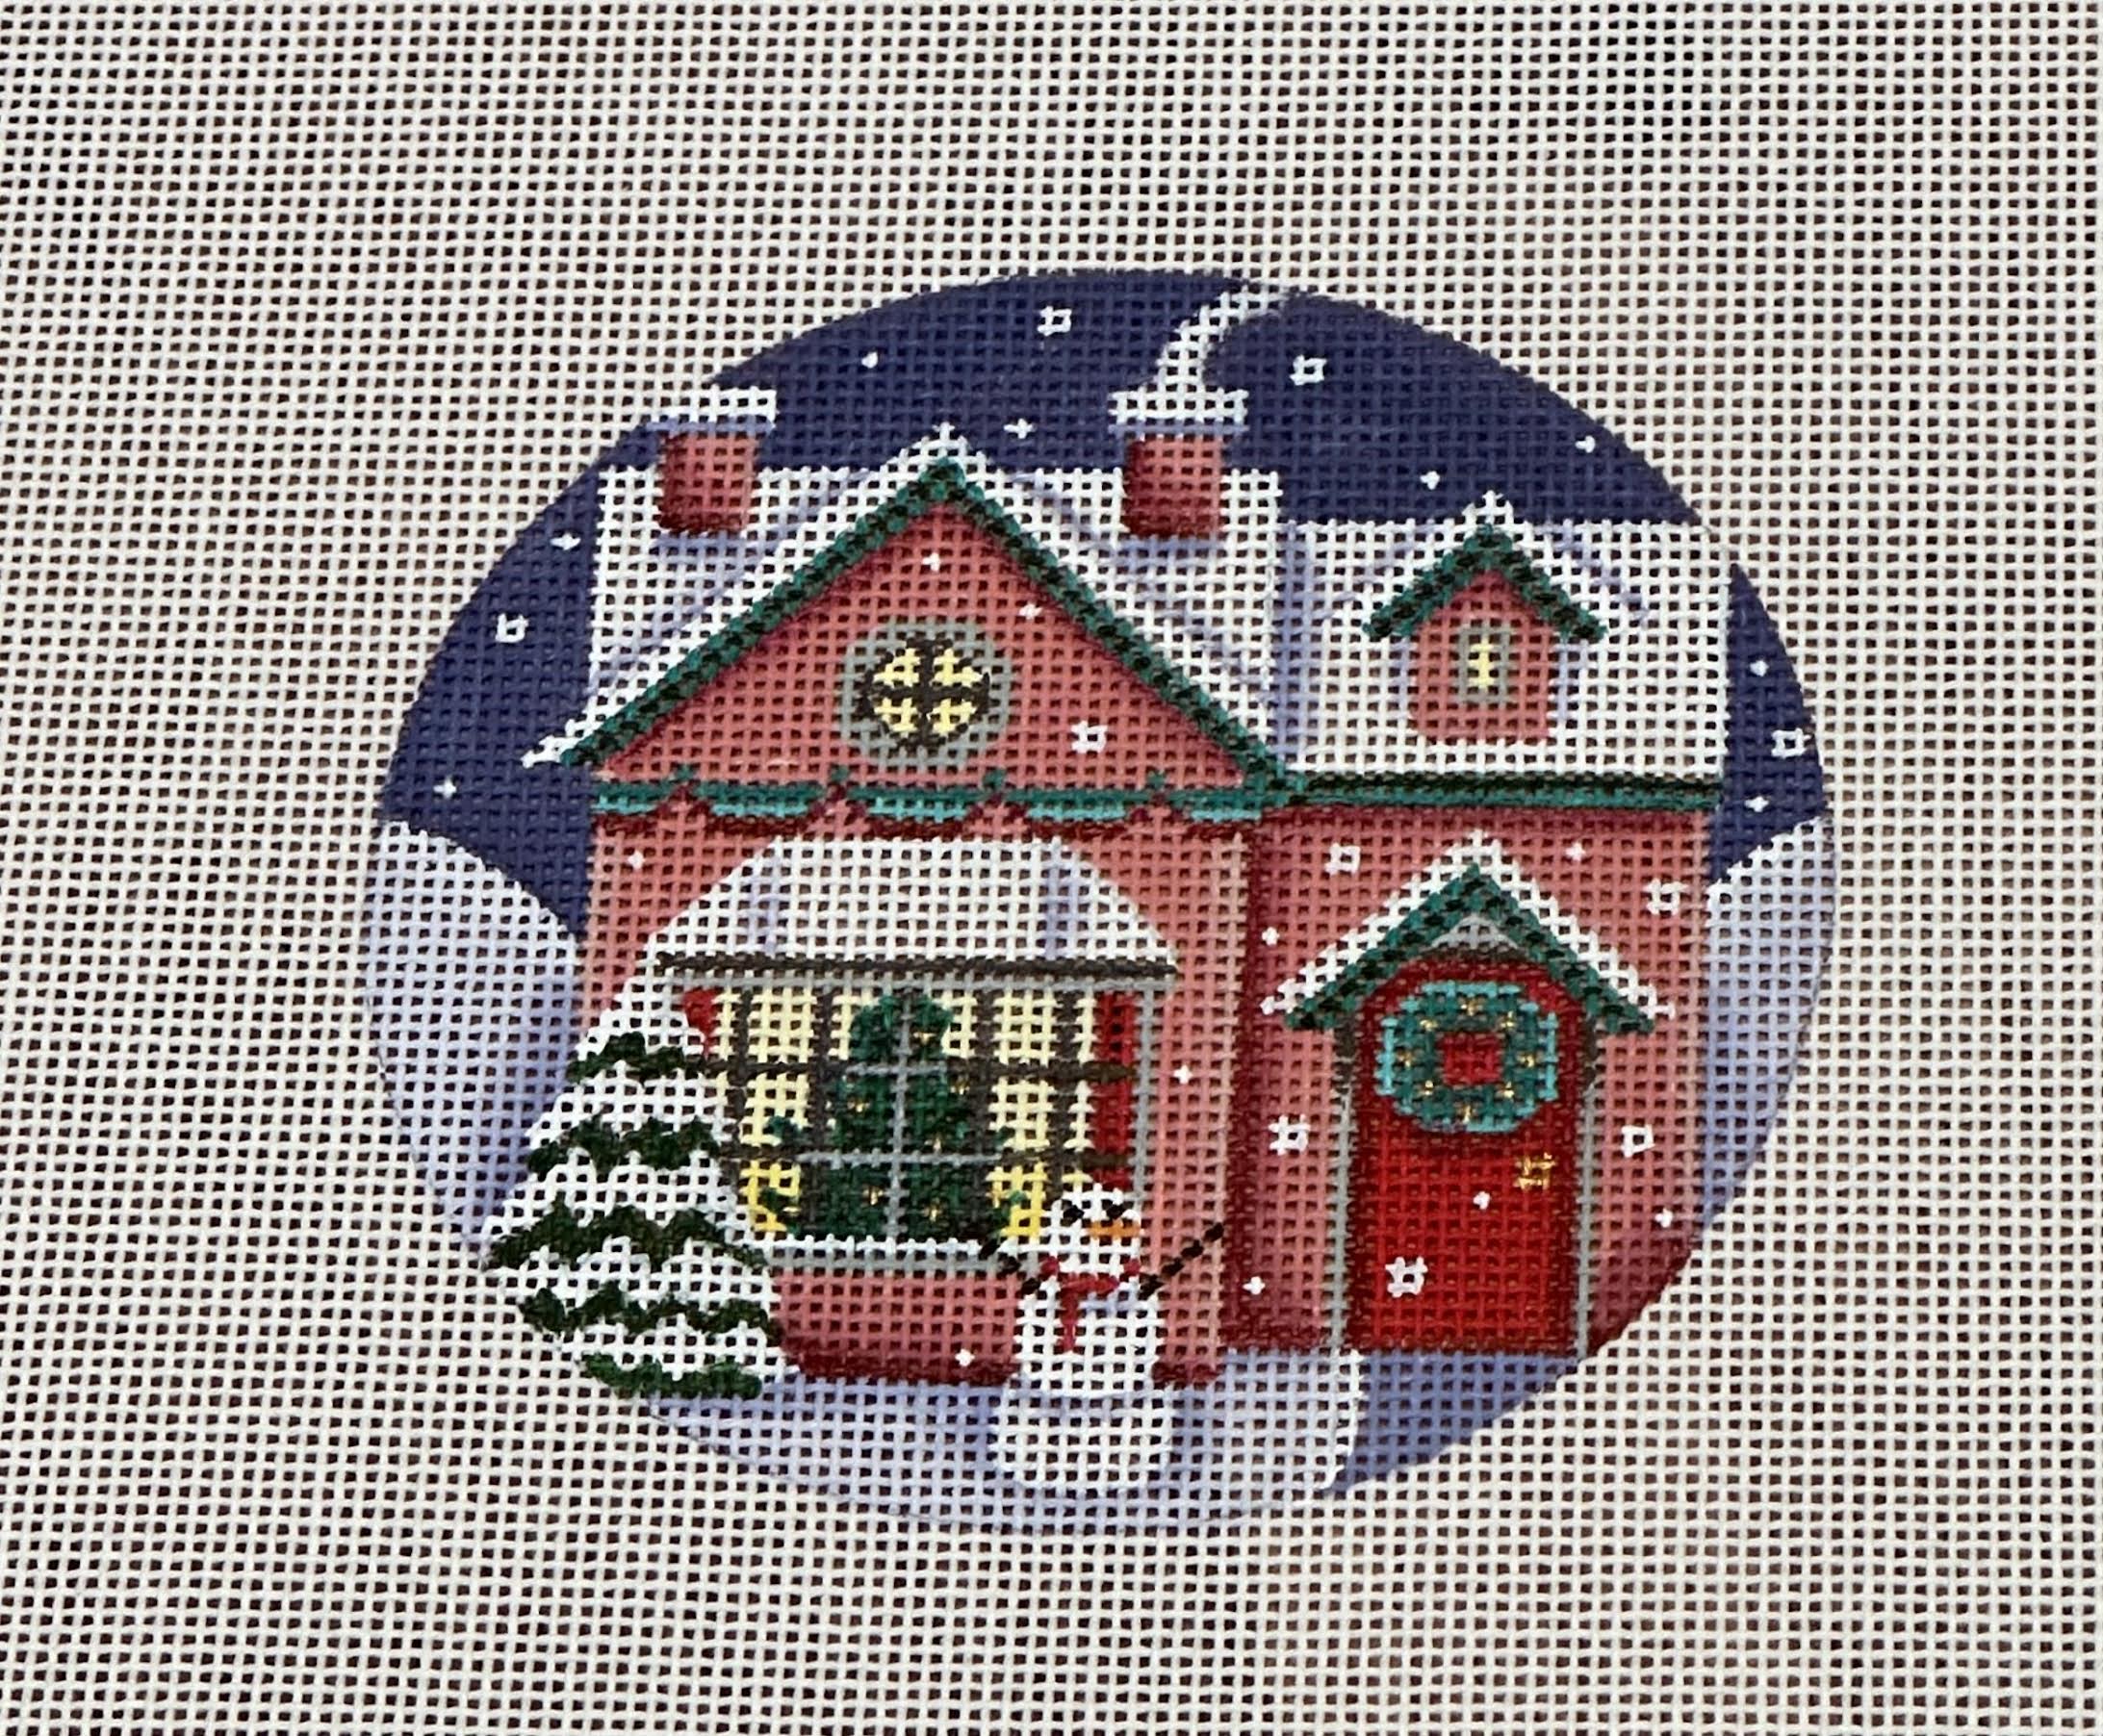 Rebecca Wood 1073 Cozy Christmas Cottage